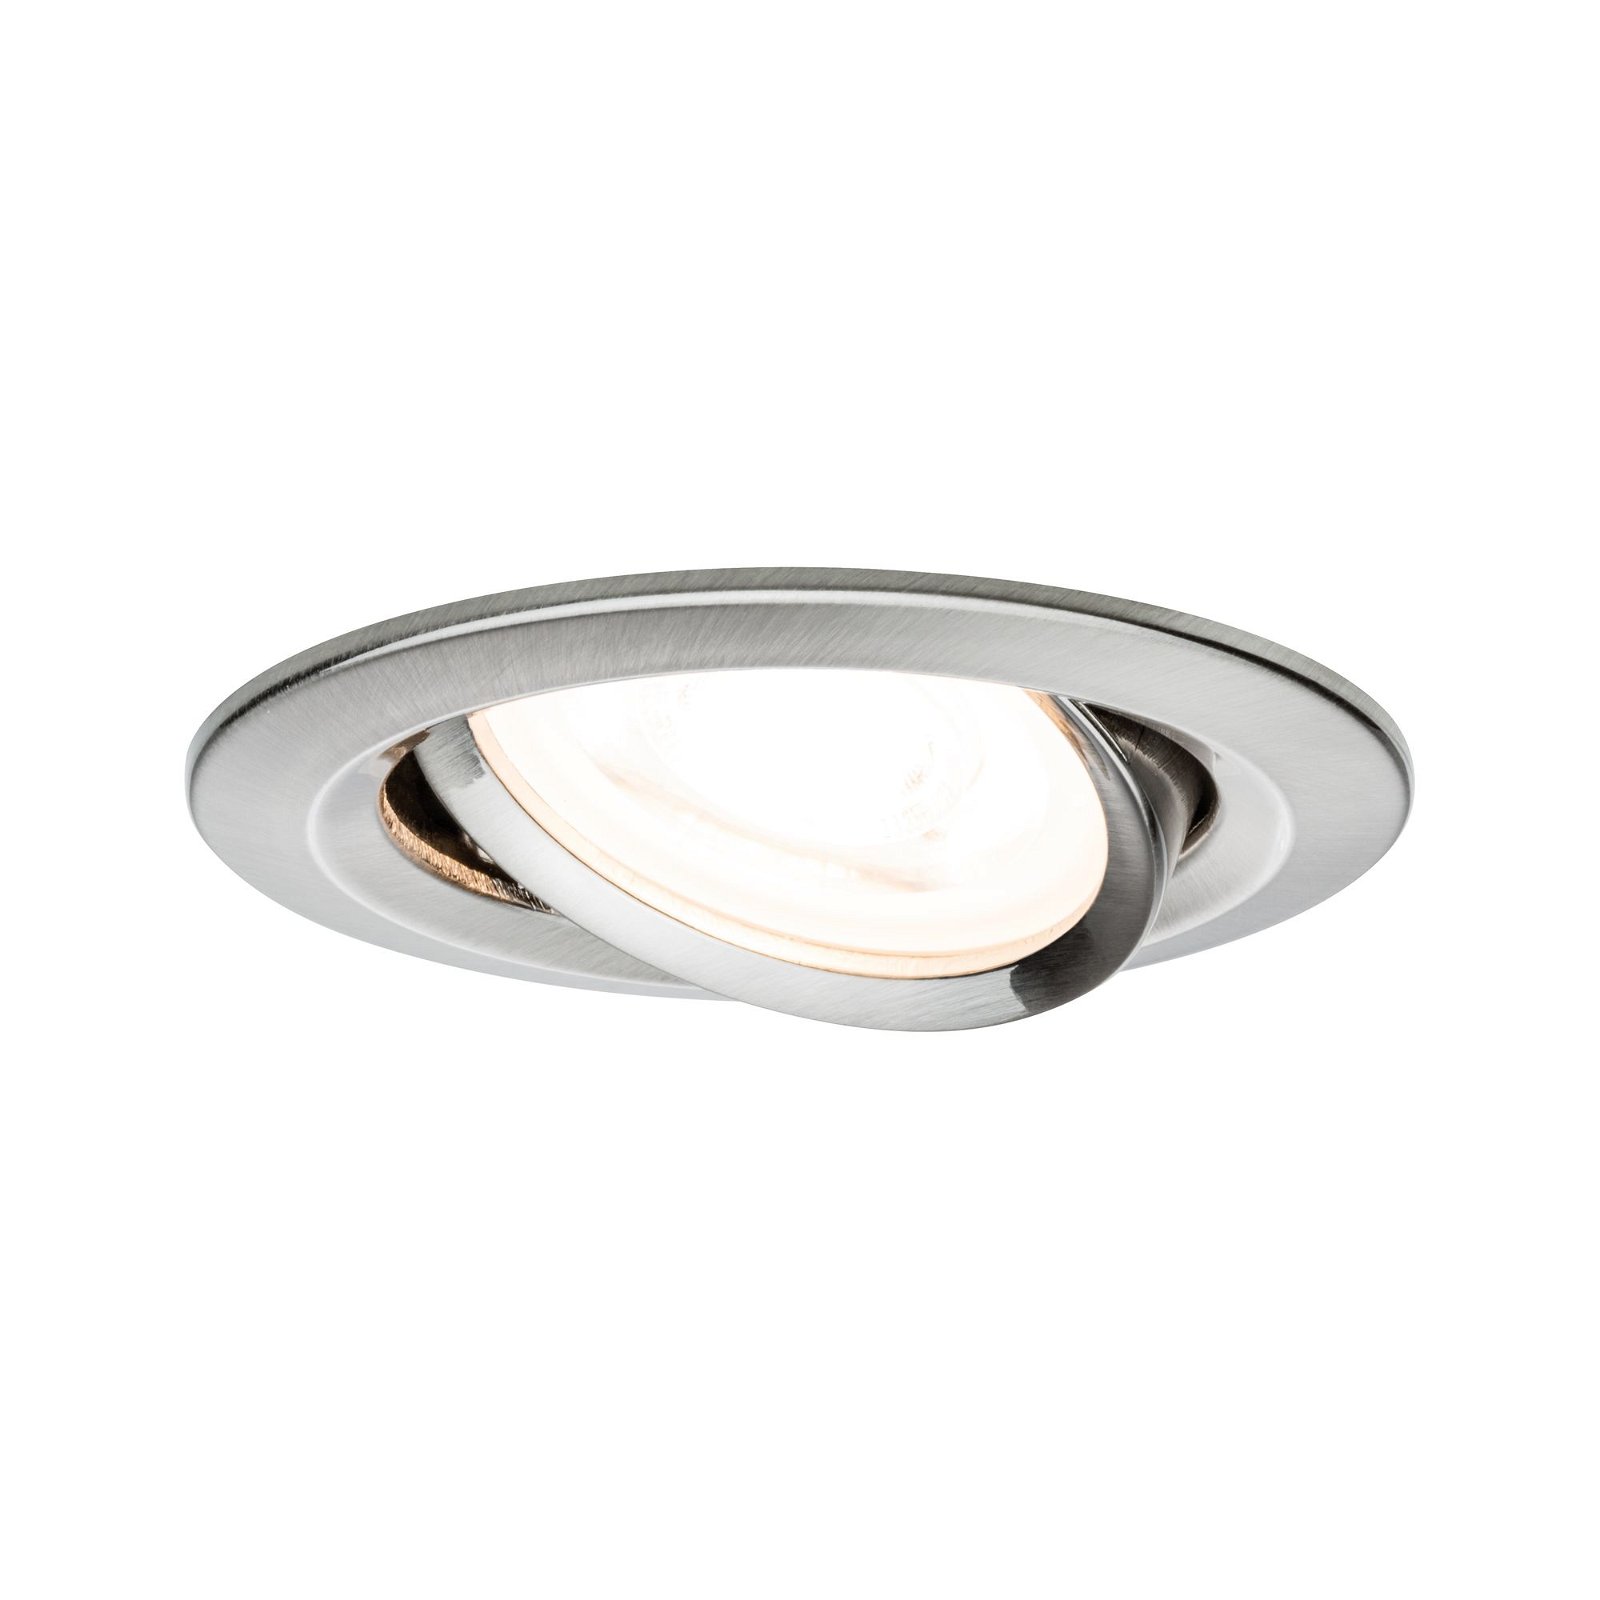 Recessed luminaire Nova Swivelling round 84mm 50° GU10 max. 35W 230V dimmable Brushed iron